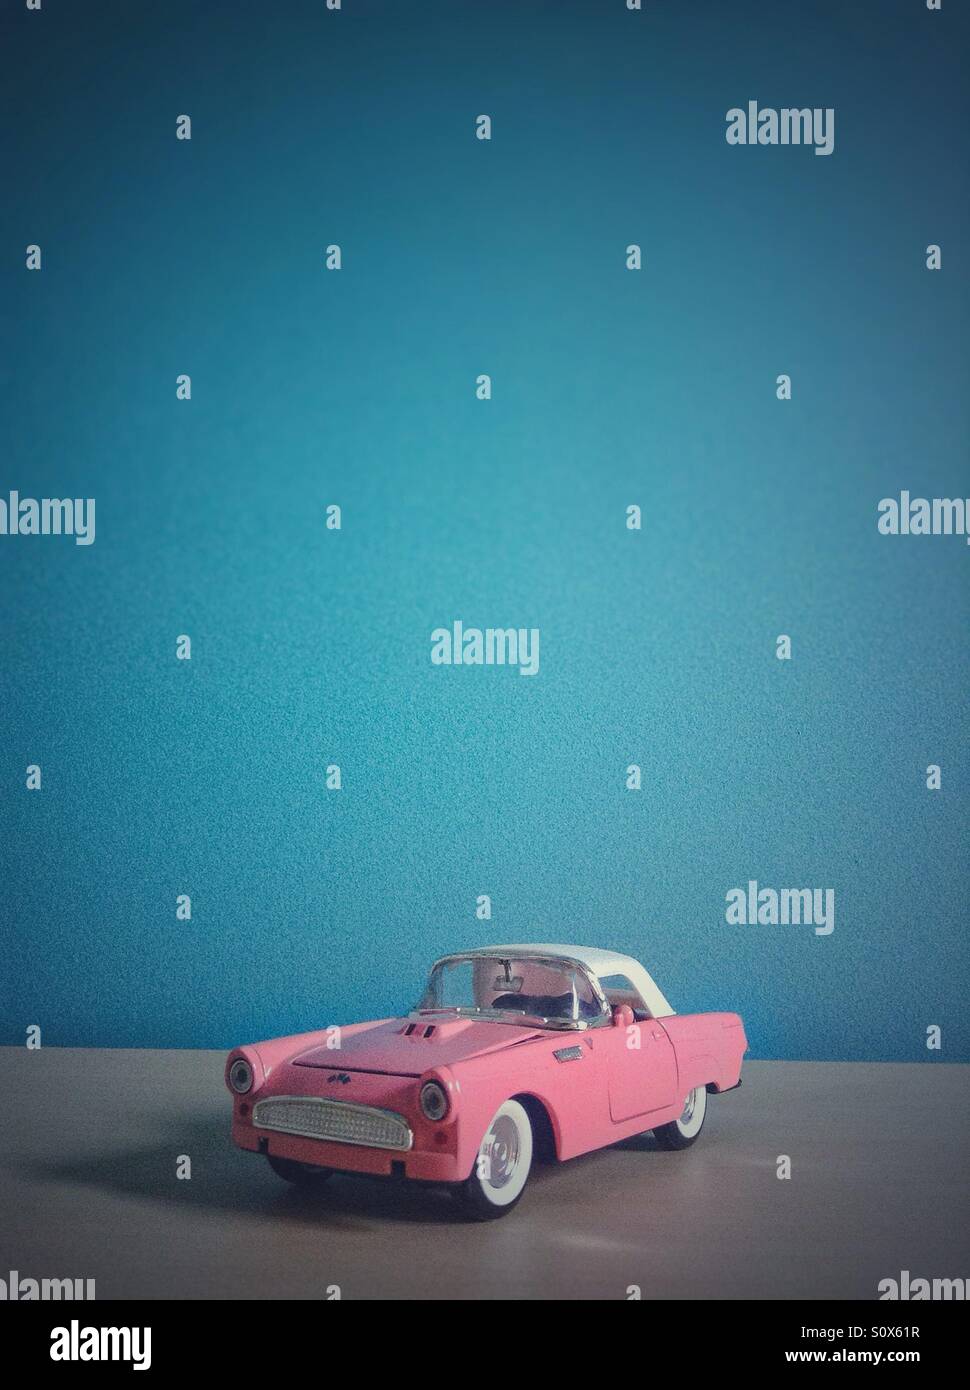 Classical pink vintage toy car on blue background Stock Photo